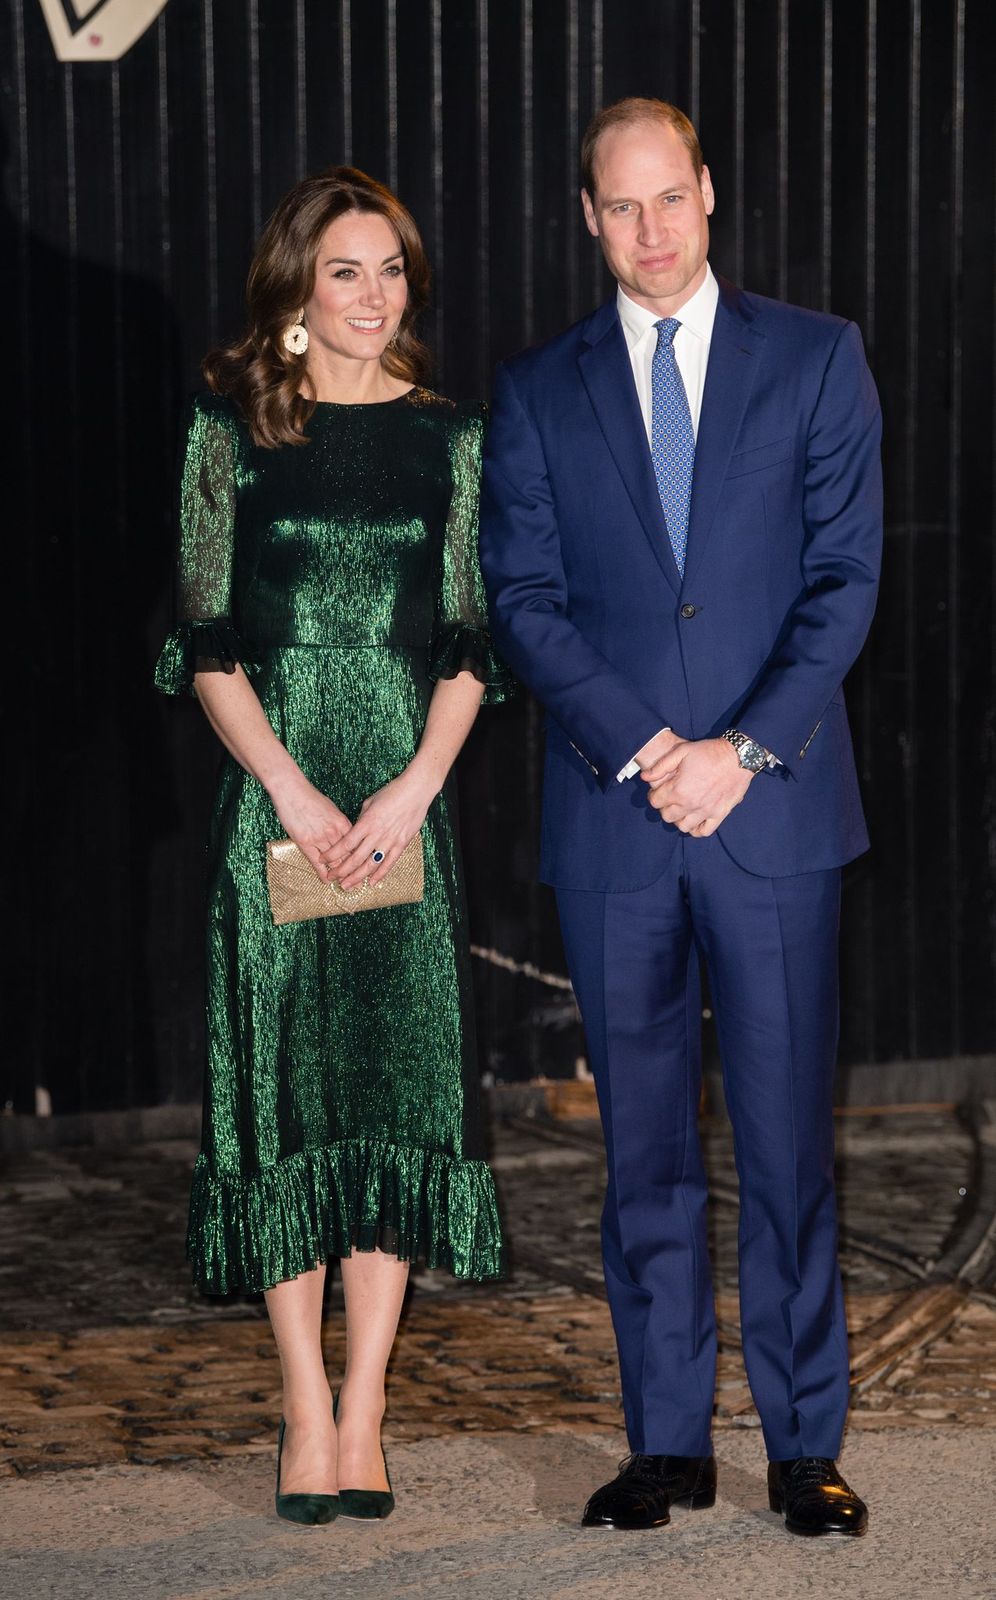 Kate Middleton and Prince William at the Guinness Storehouse’s Gravity Bar during day one of their visit to Ireland on March 03, 2020 | Photo: Getty Images